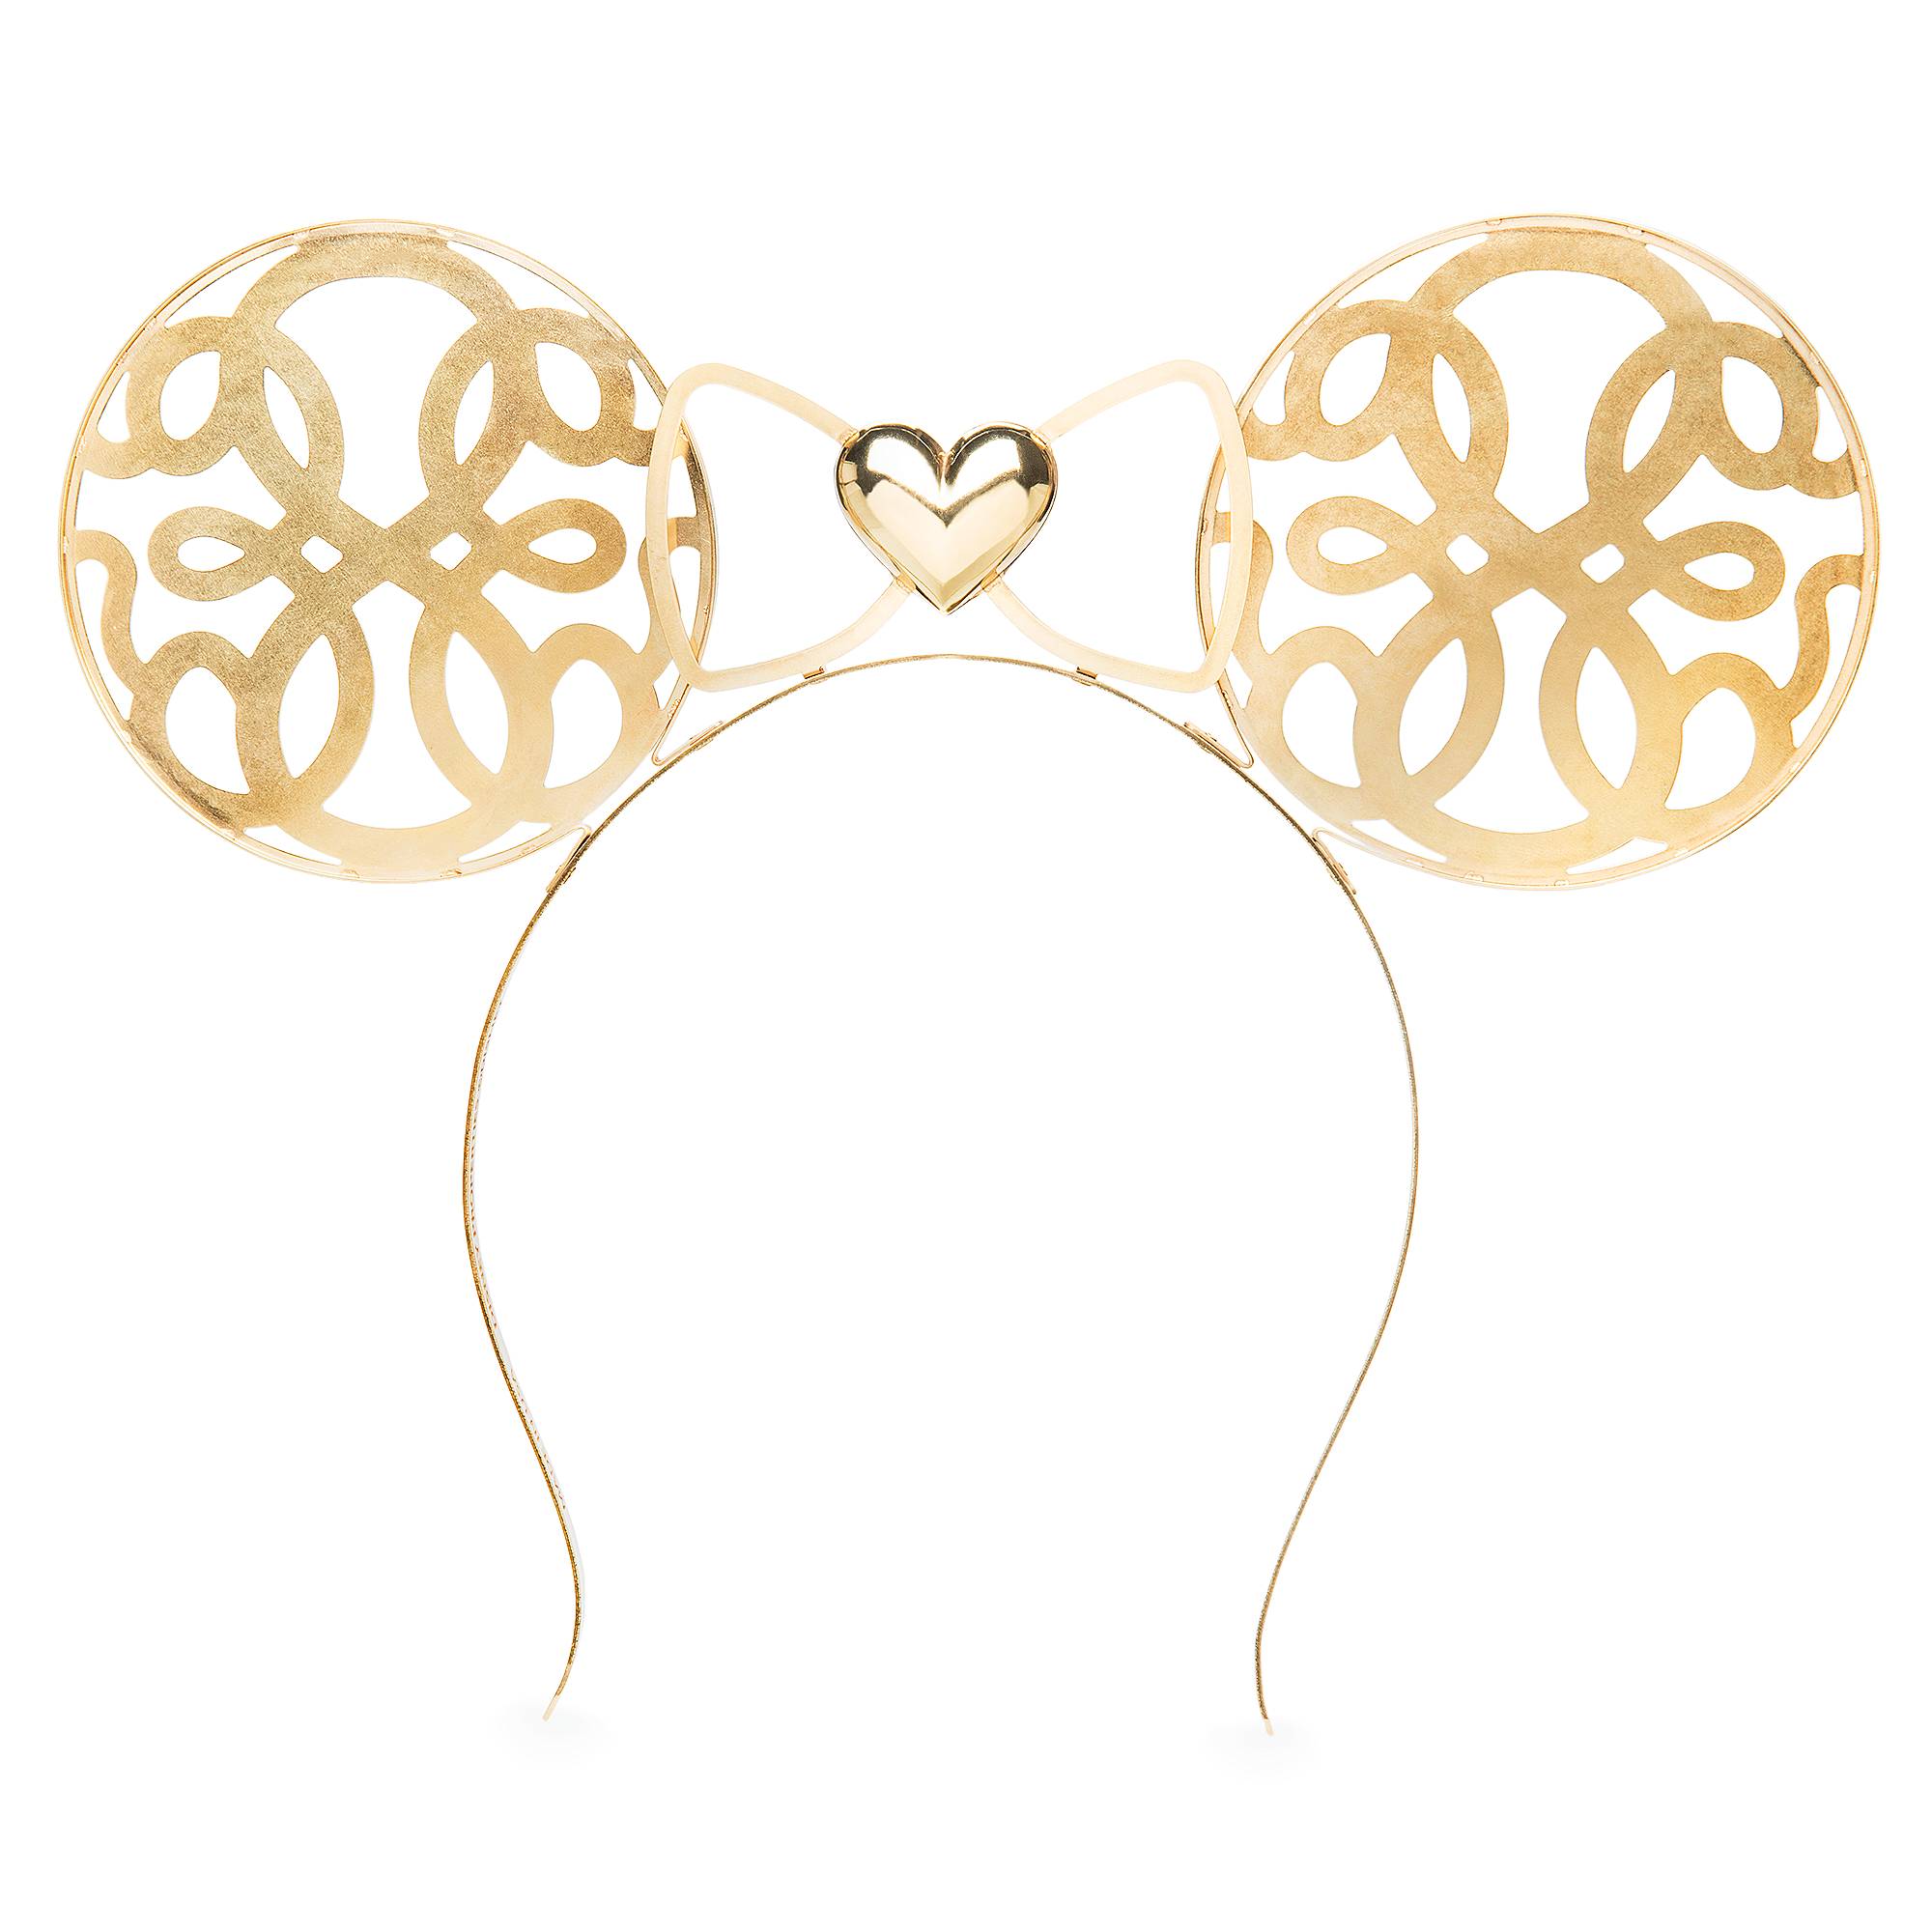 Minnie Mouse Metal Ear Headband by Alex and Ani - Limited Release image